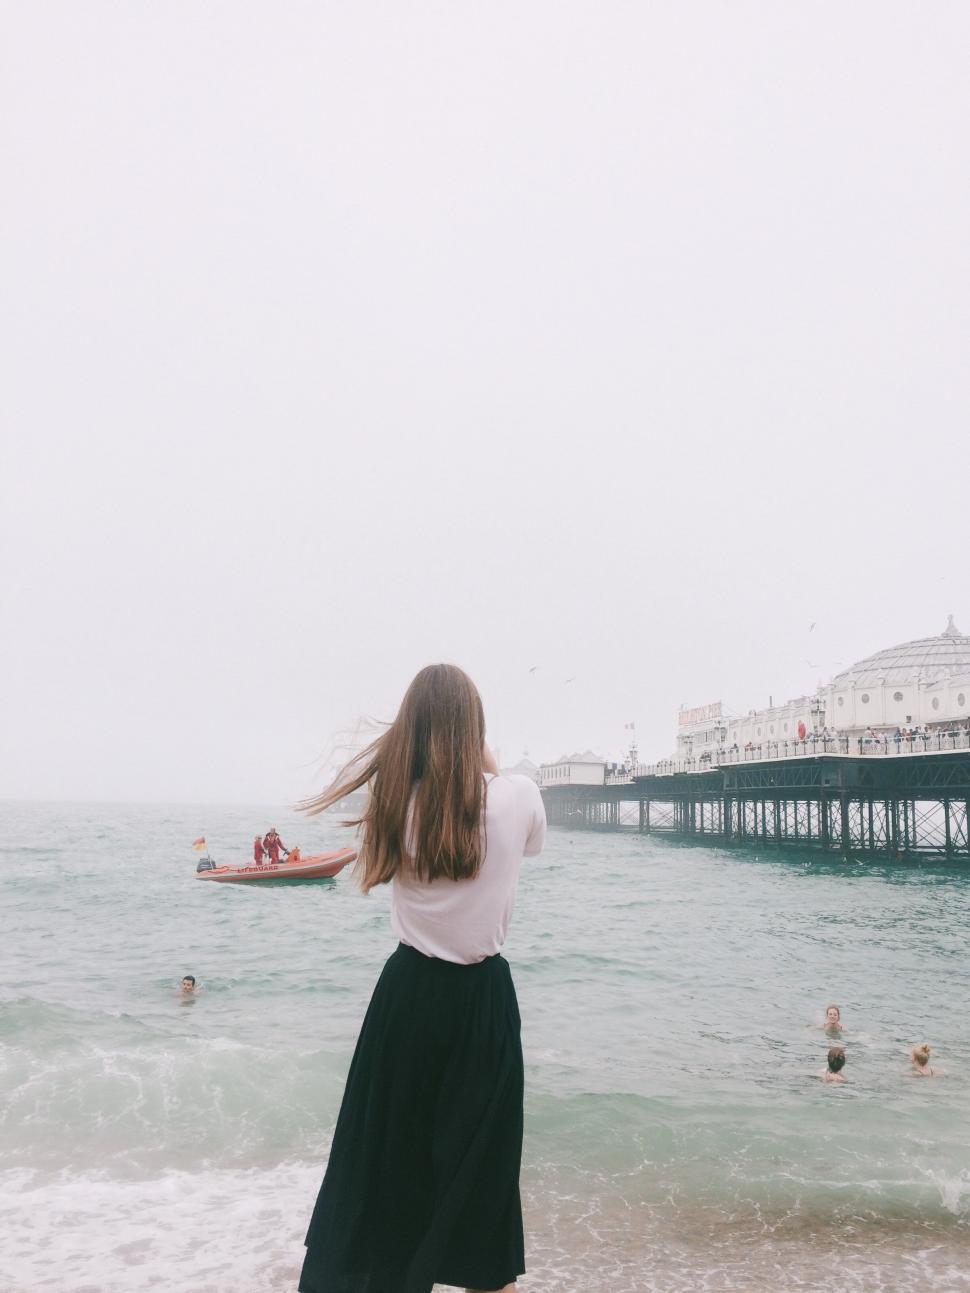 Free Image of Woman looking at a seaside pier 